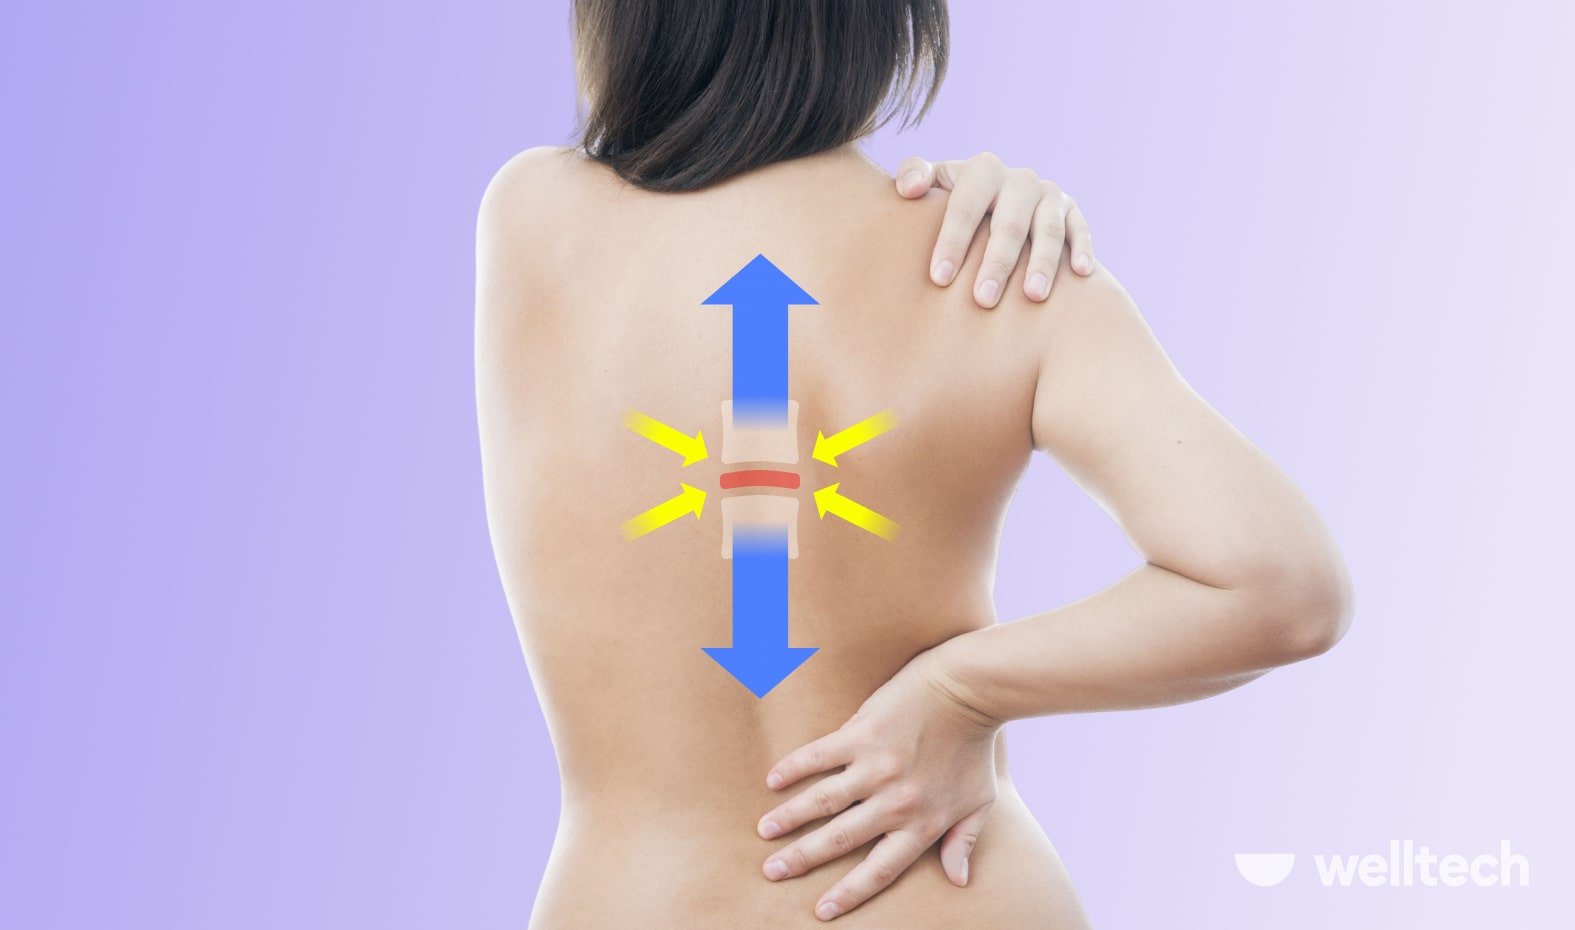 a woman is standing with her back to the camera, touching her lower back, spine decompression illustrated, stretches to decompress spine